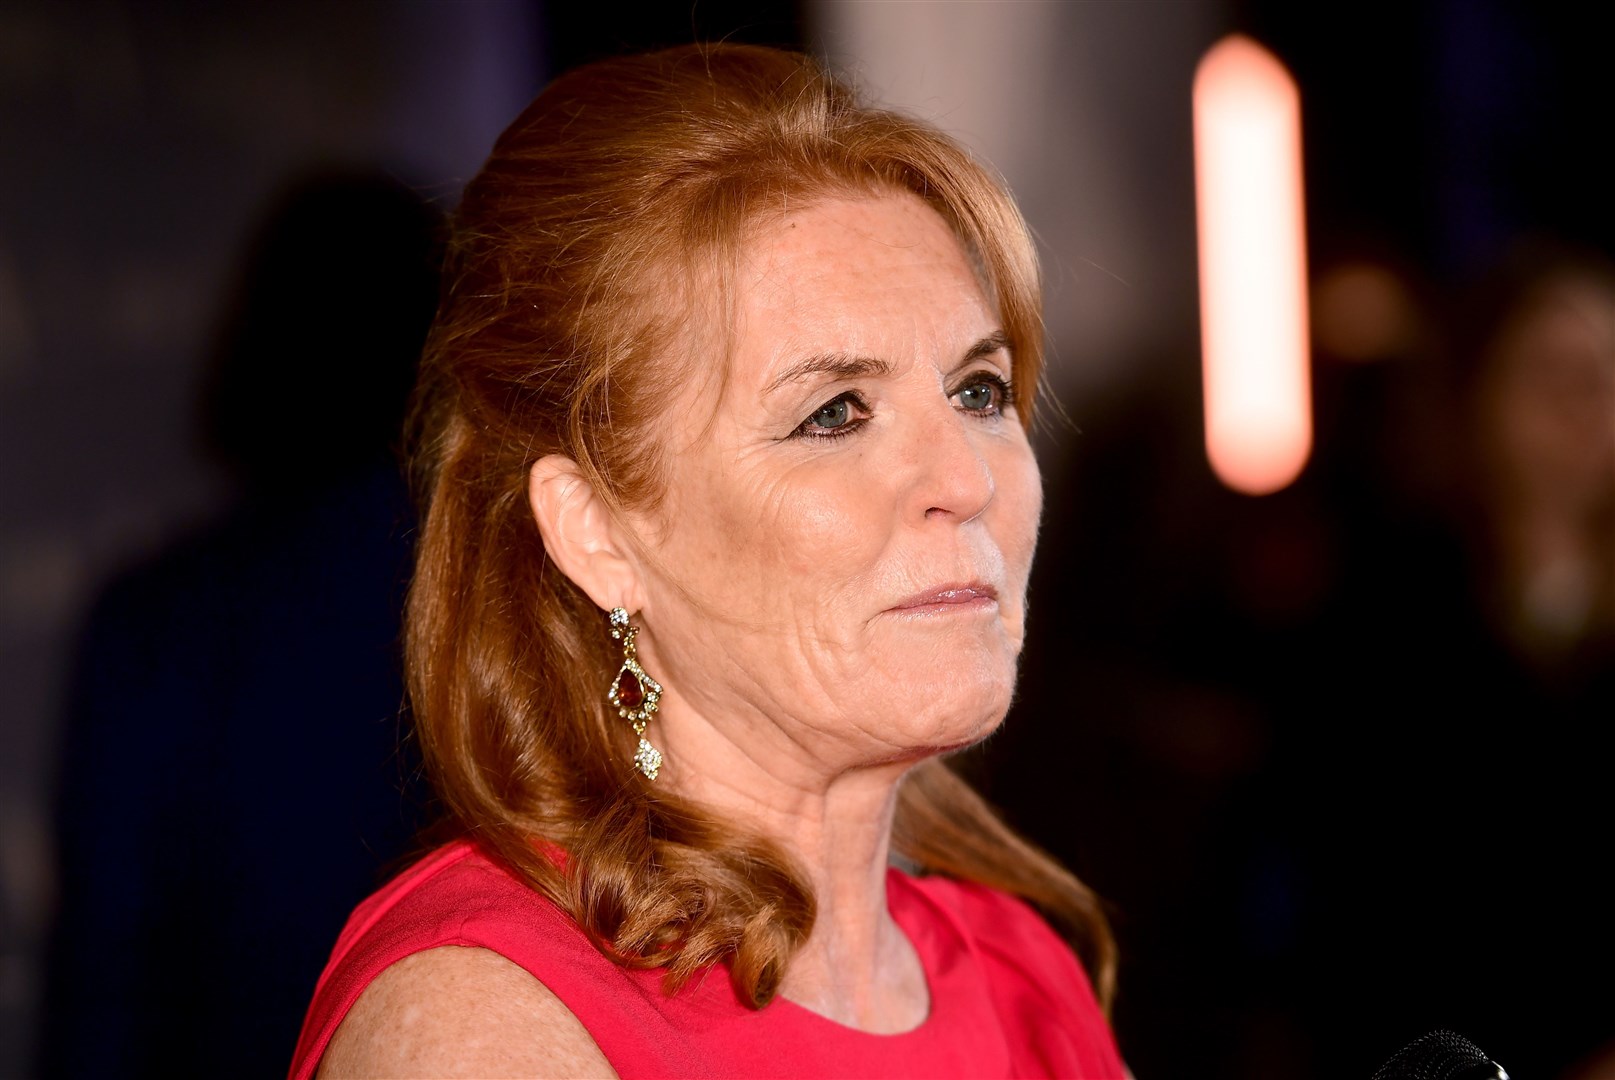 Sarah, Duchess of York, was labelled as a friend of Epstein and Maxwell by Mr Alessi (Ian West/PA)